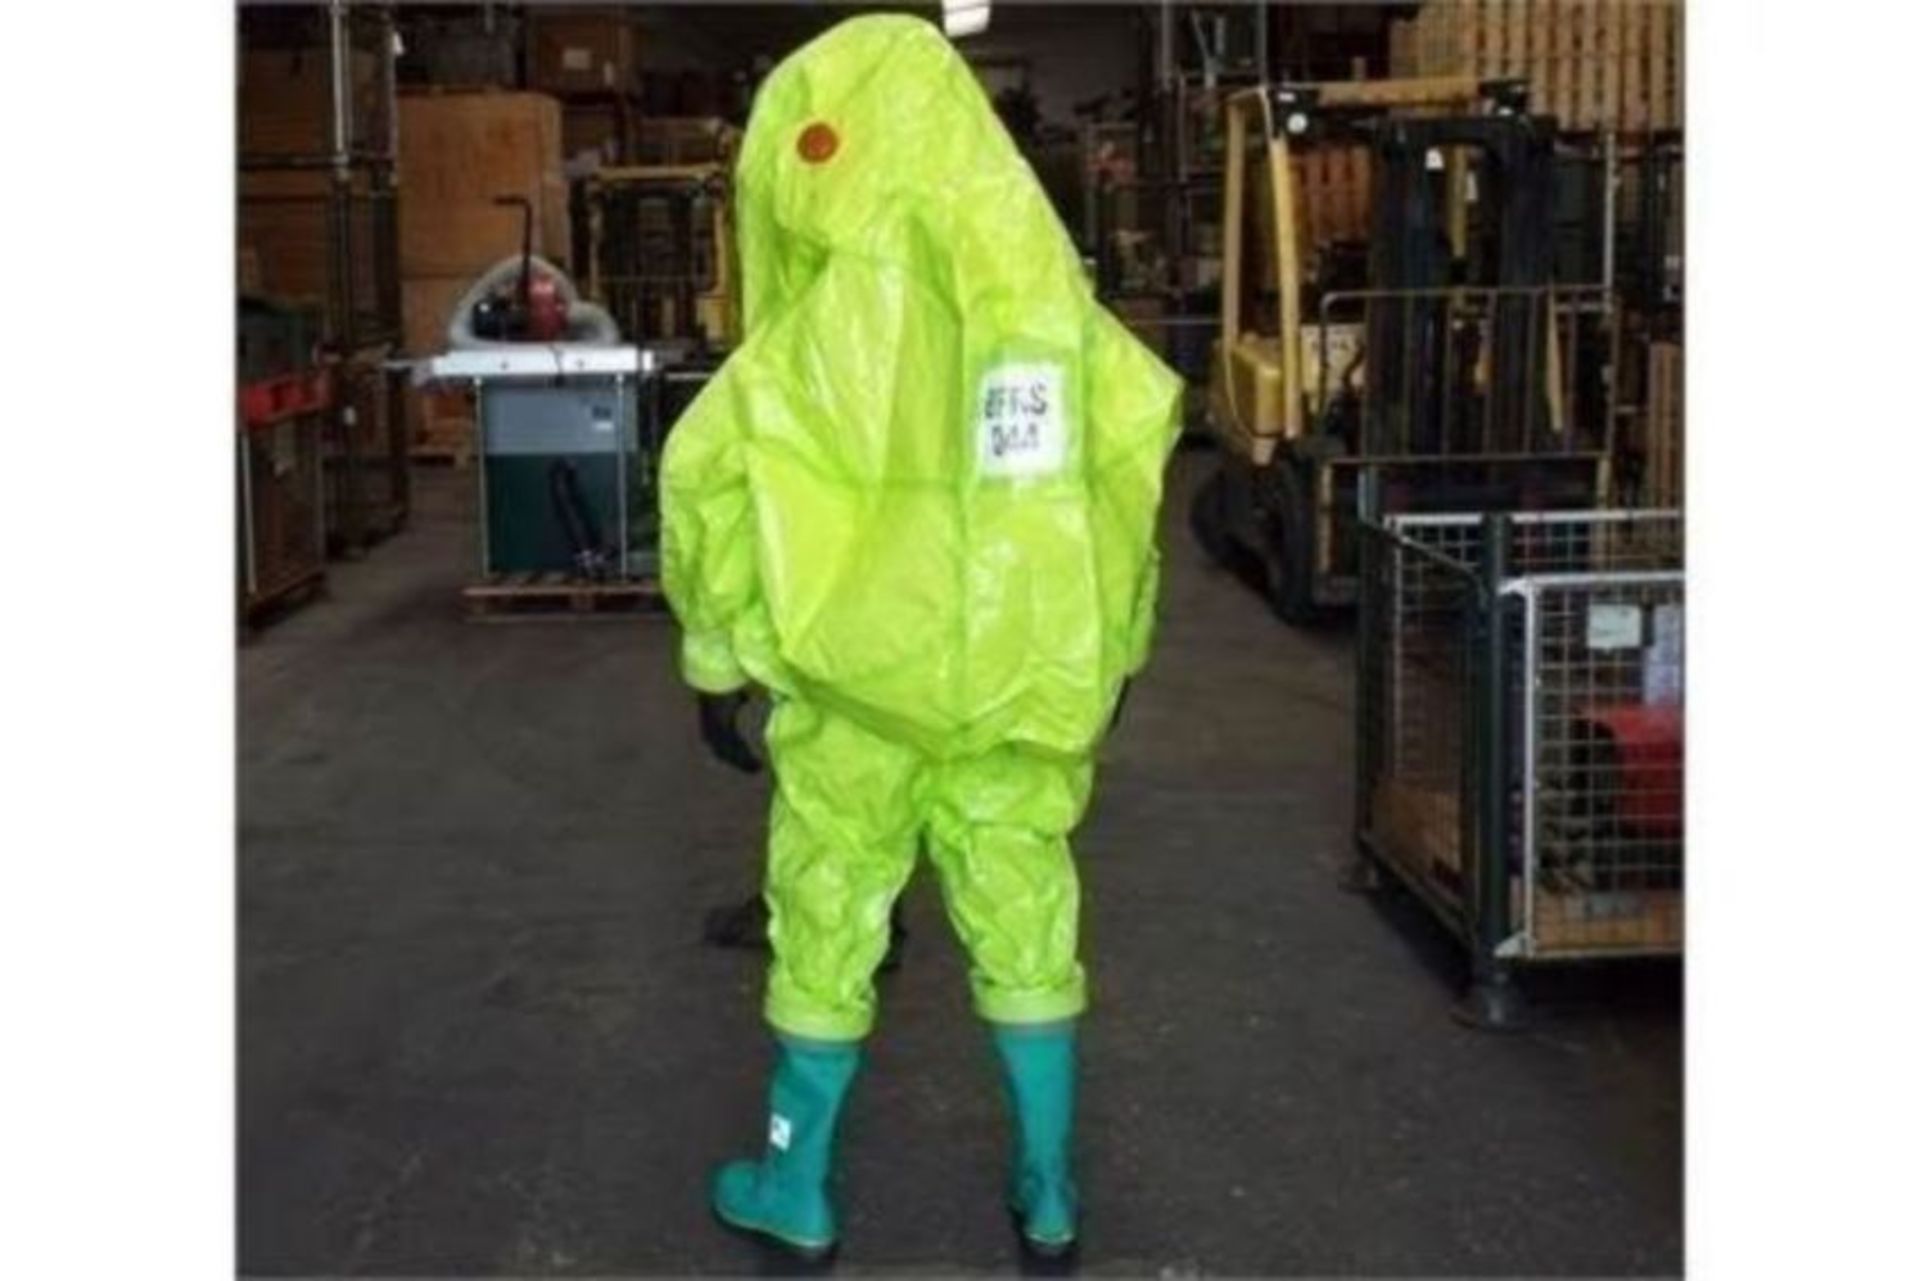 10 x Respirex Tychem TK Gas-Tight Hazmat Suit Type 1A with Attached Boots and Gloves - Image 3 of 10